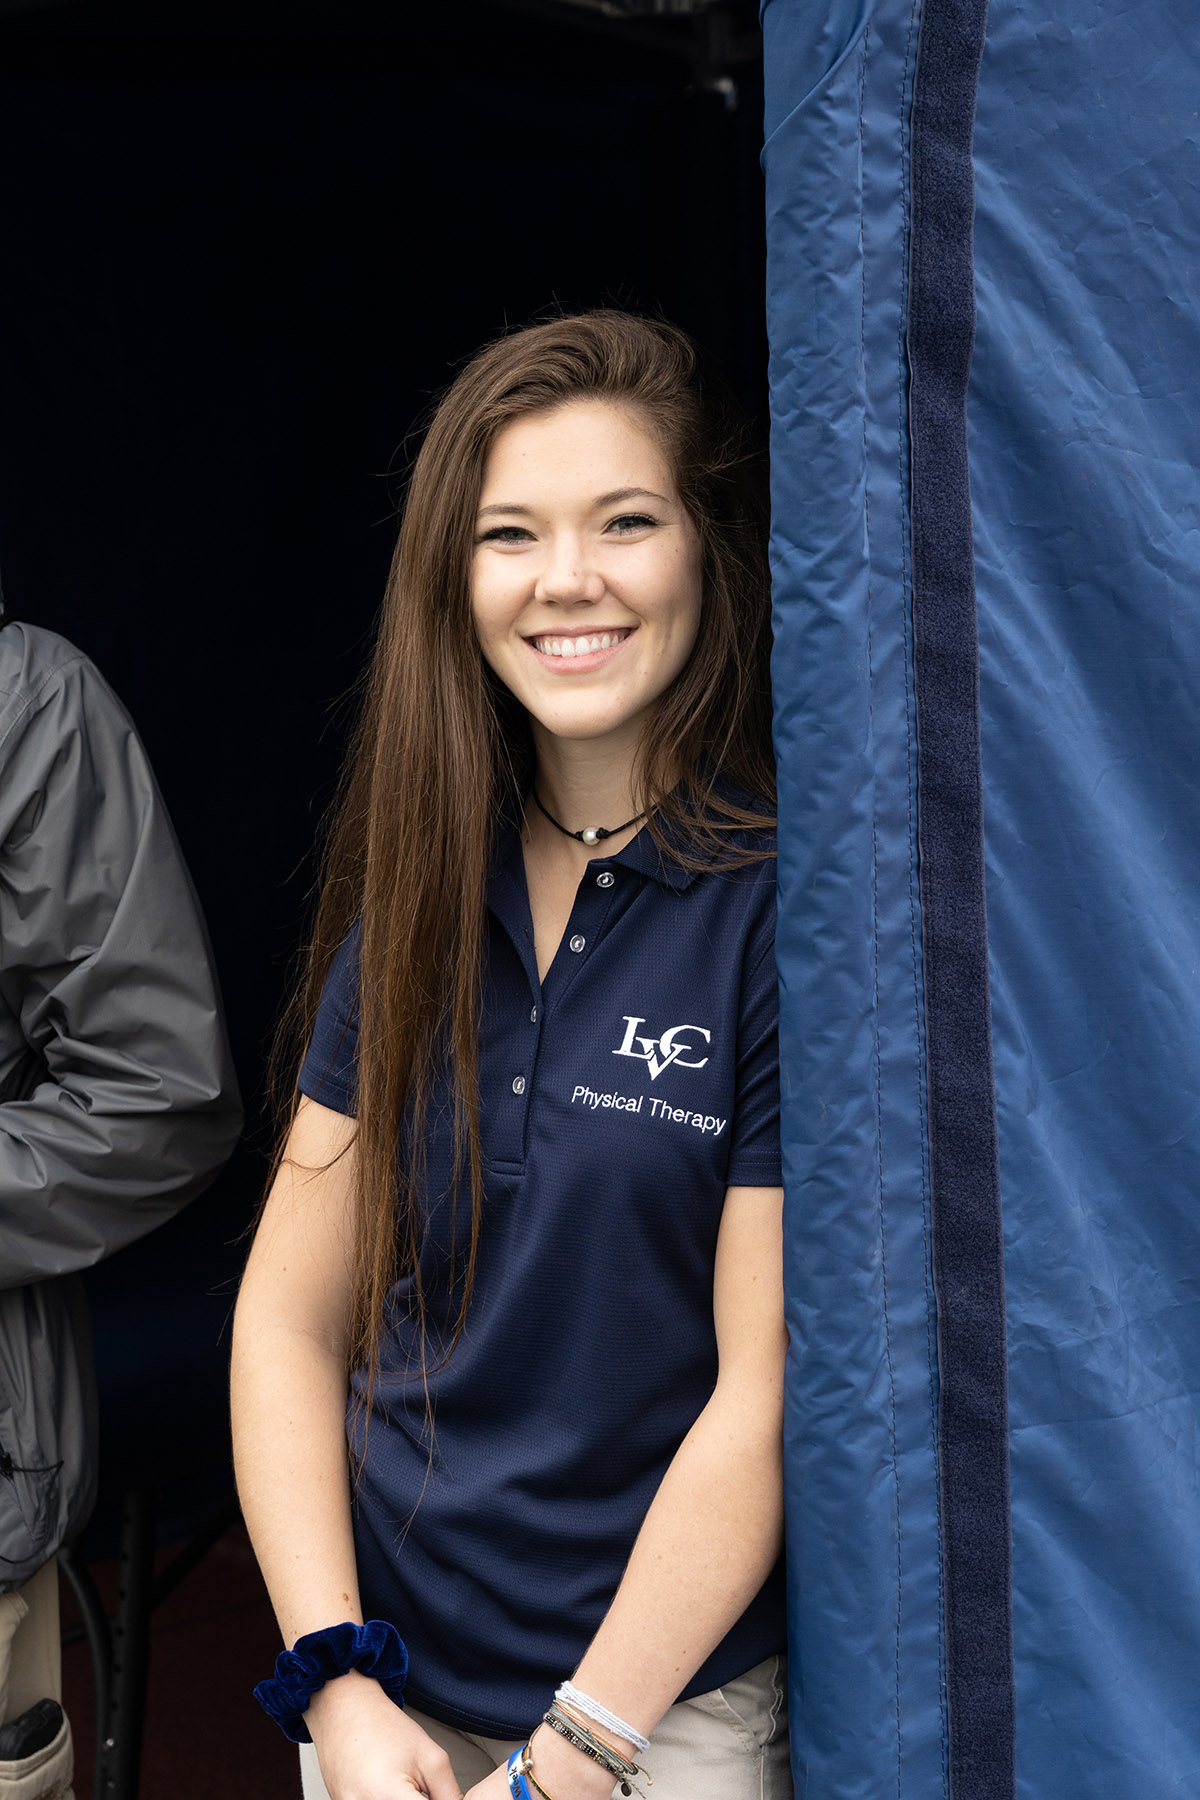 physical therapy program student pictured in blue shirt with LVC Physical Therapy logo